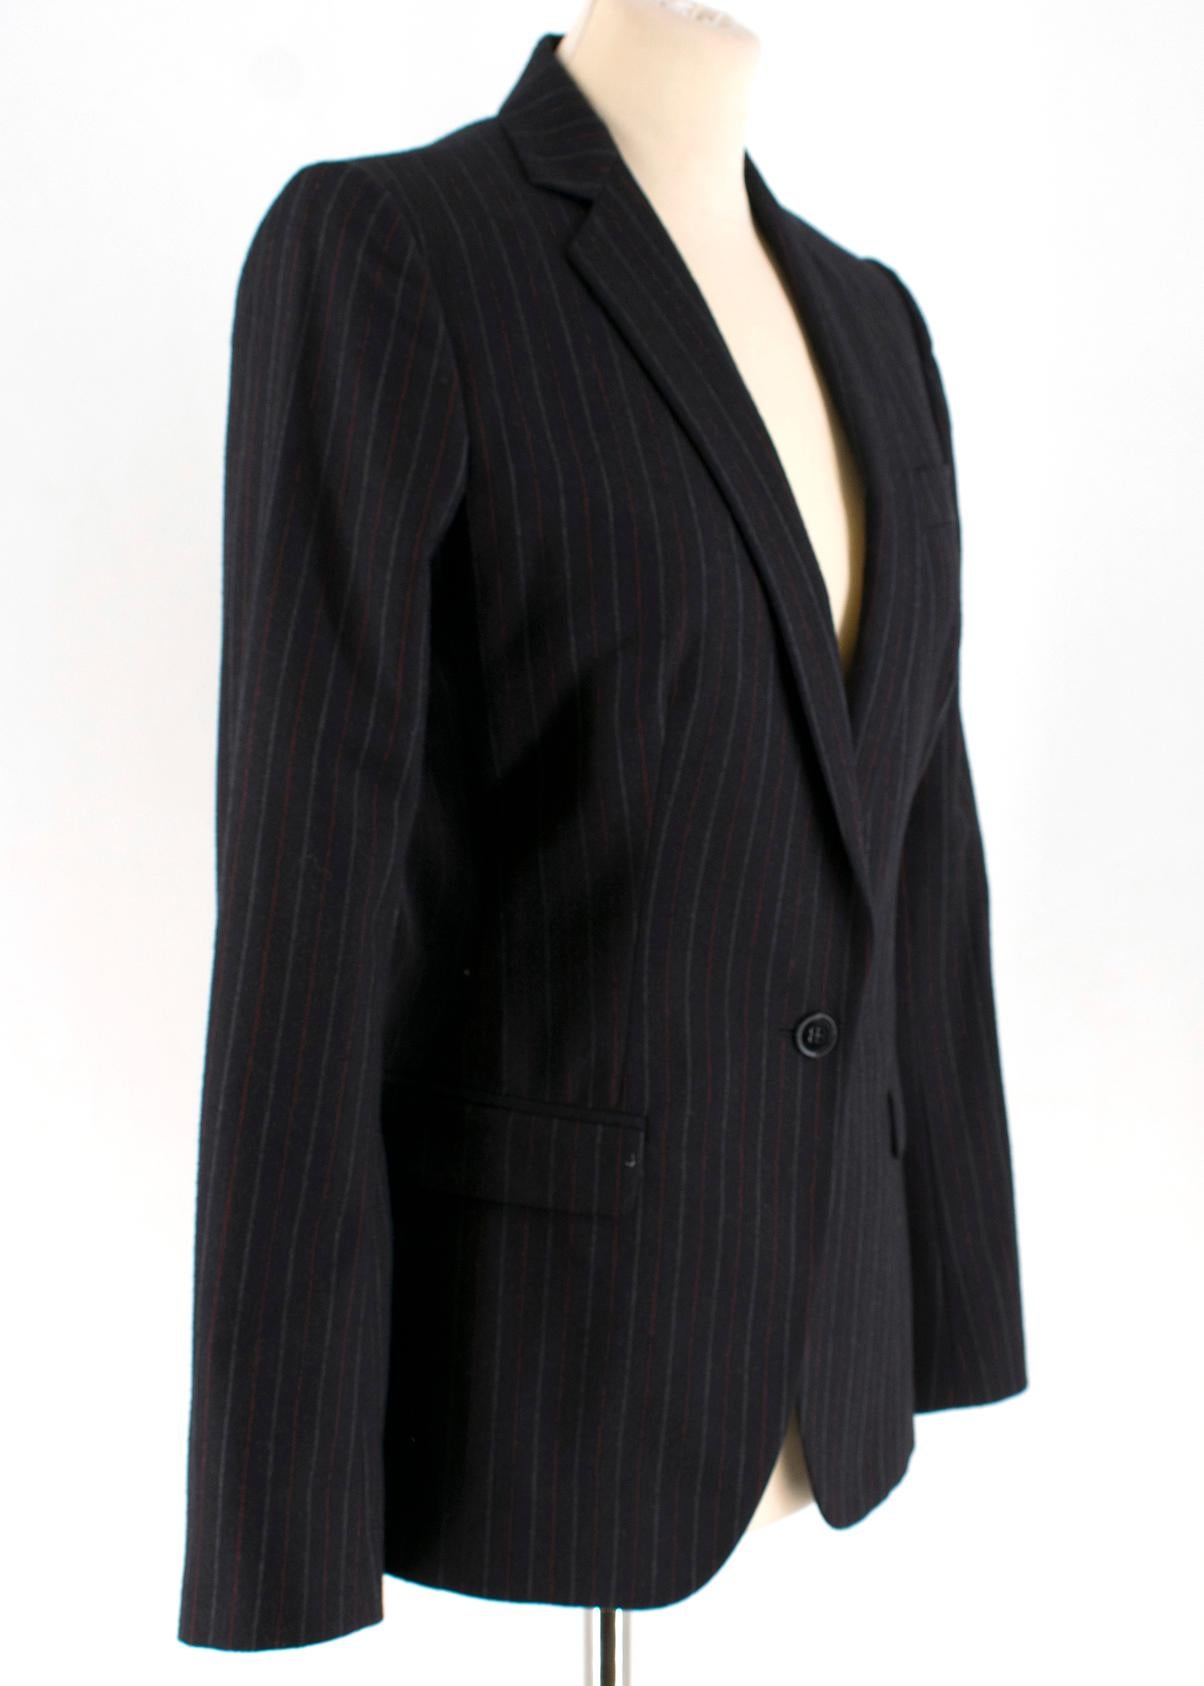 Dolce & Gabbana Dark Grey Pin Striped Wool blend Trousers Suit

Blazer:
- dark grey blazer
- pin striped
- single breasted
- single button fastening to the front 
- lined

Trousers:
- dark grey trousers
- pin striped
- slim straight leg fit
- button